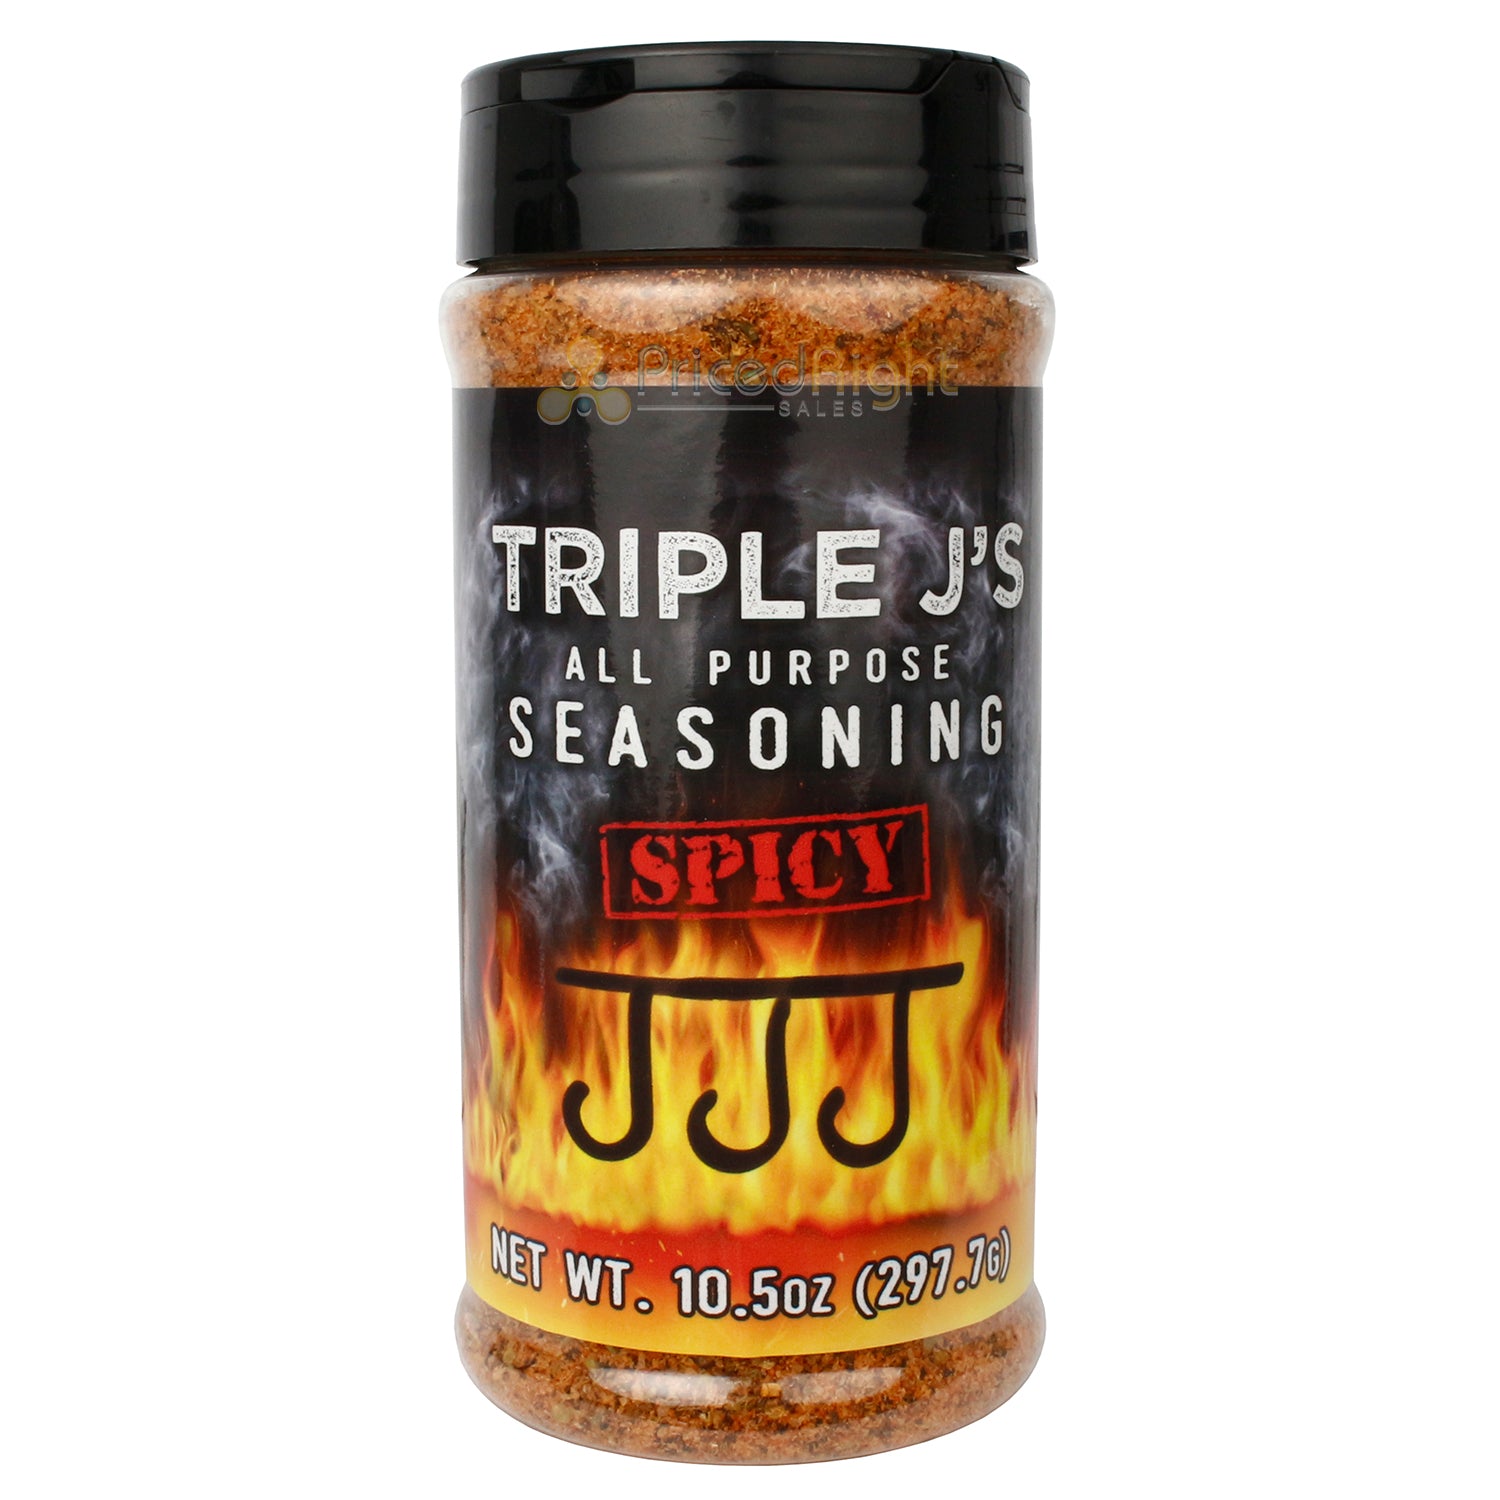 Steak Seasoning By Dales, No Cholesterol  Delicious on All Meats, Fish,  Poultry 